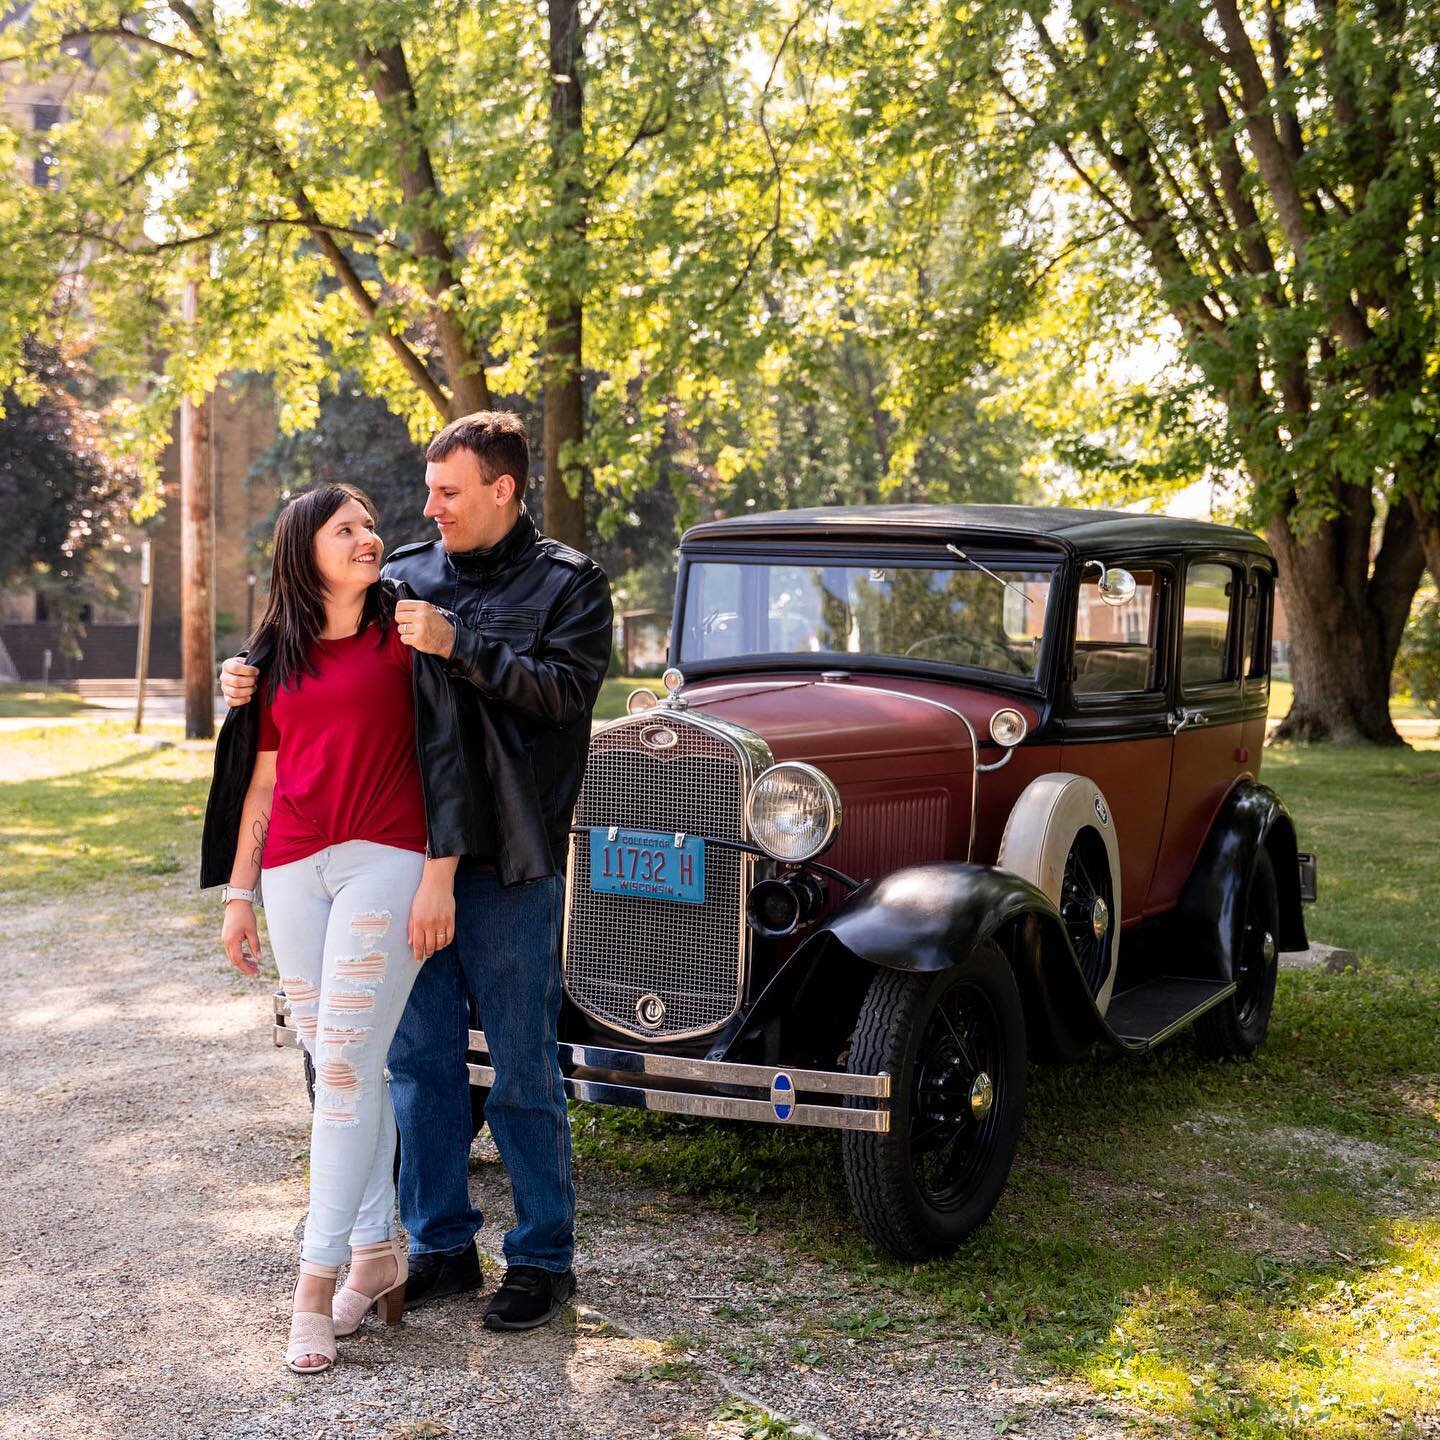 Anna loves to dance at Crystal ballroom, and Owen loves amazing old cars, so of course their engagement photos had to include both! 😍